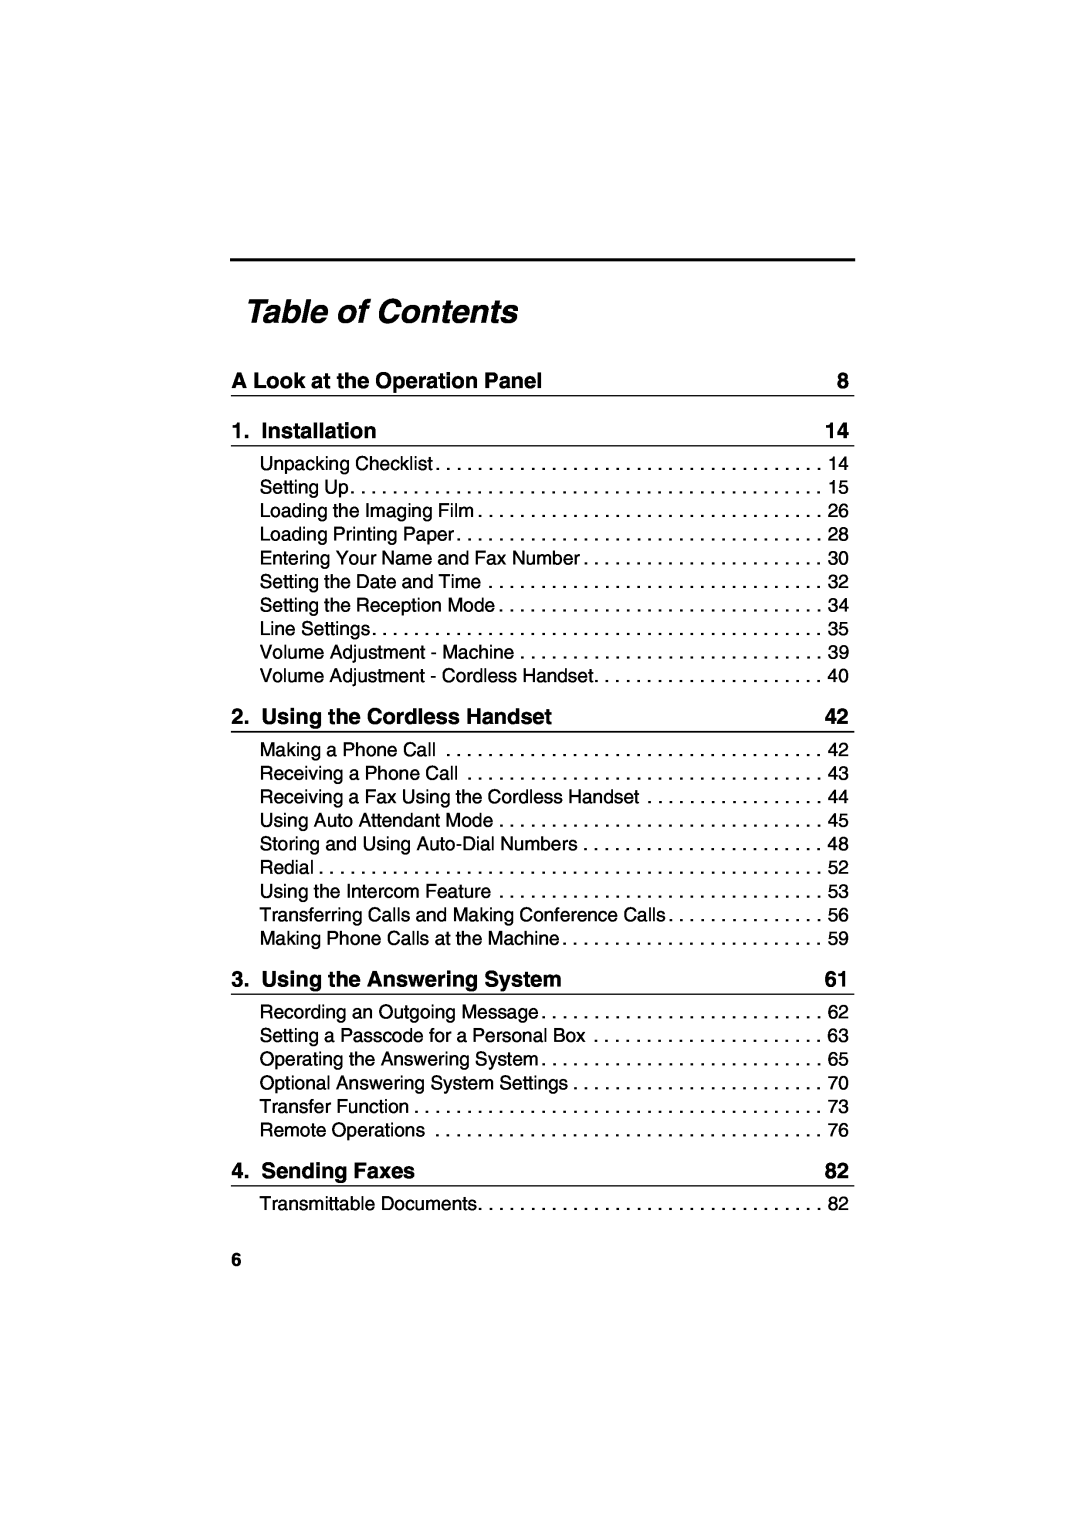 Sharp UX-CD600 Table of Contents, A Look at the Operation Panel, Installation, Using the Cordless Handset, Sending Faxes 